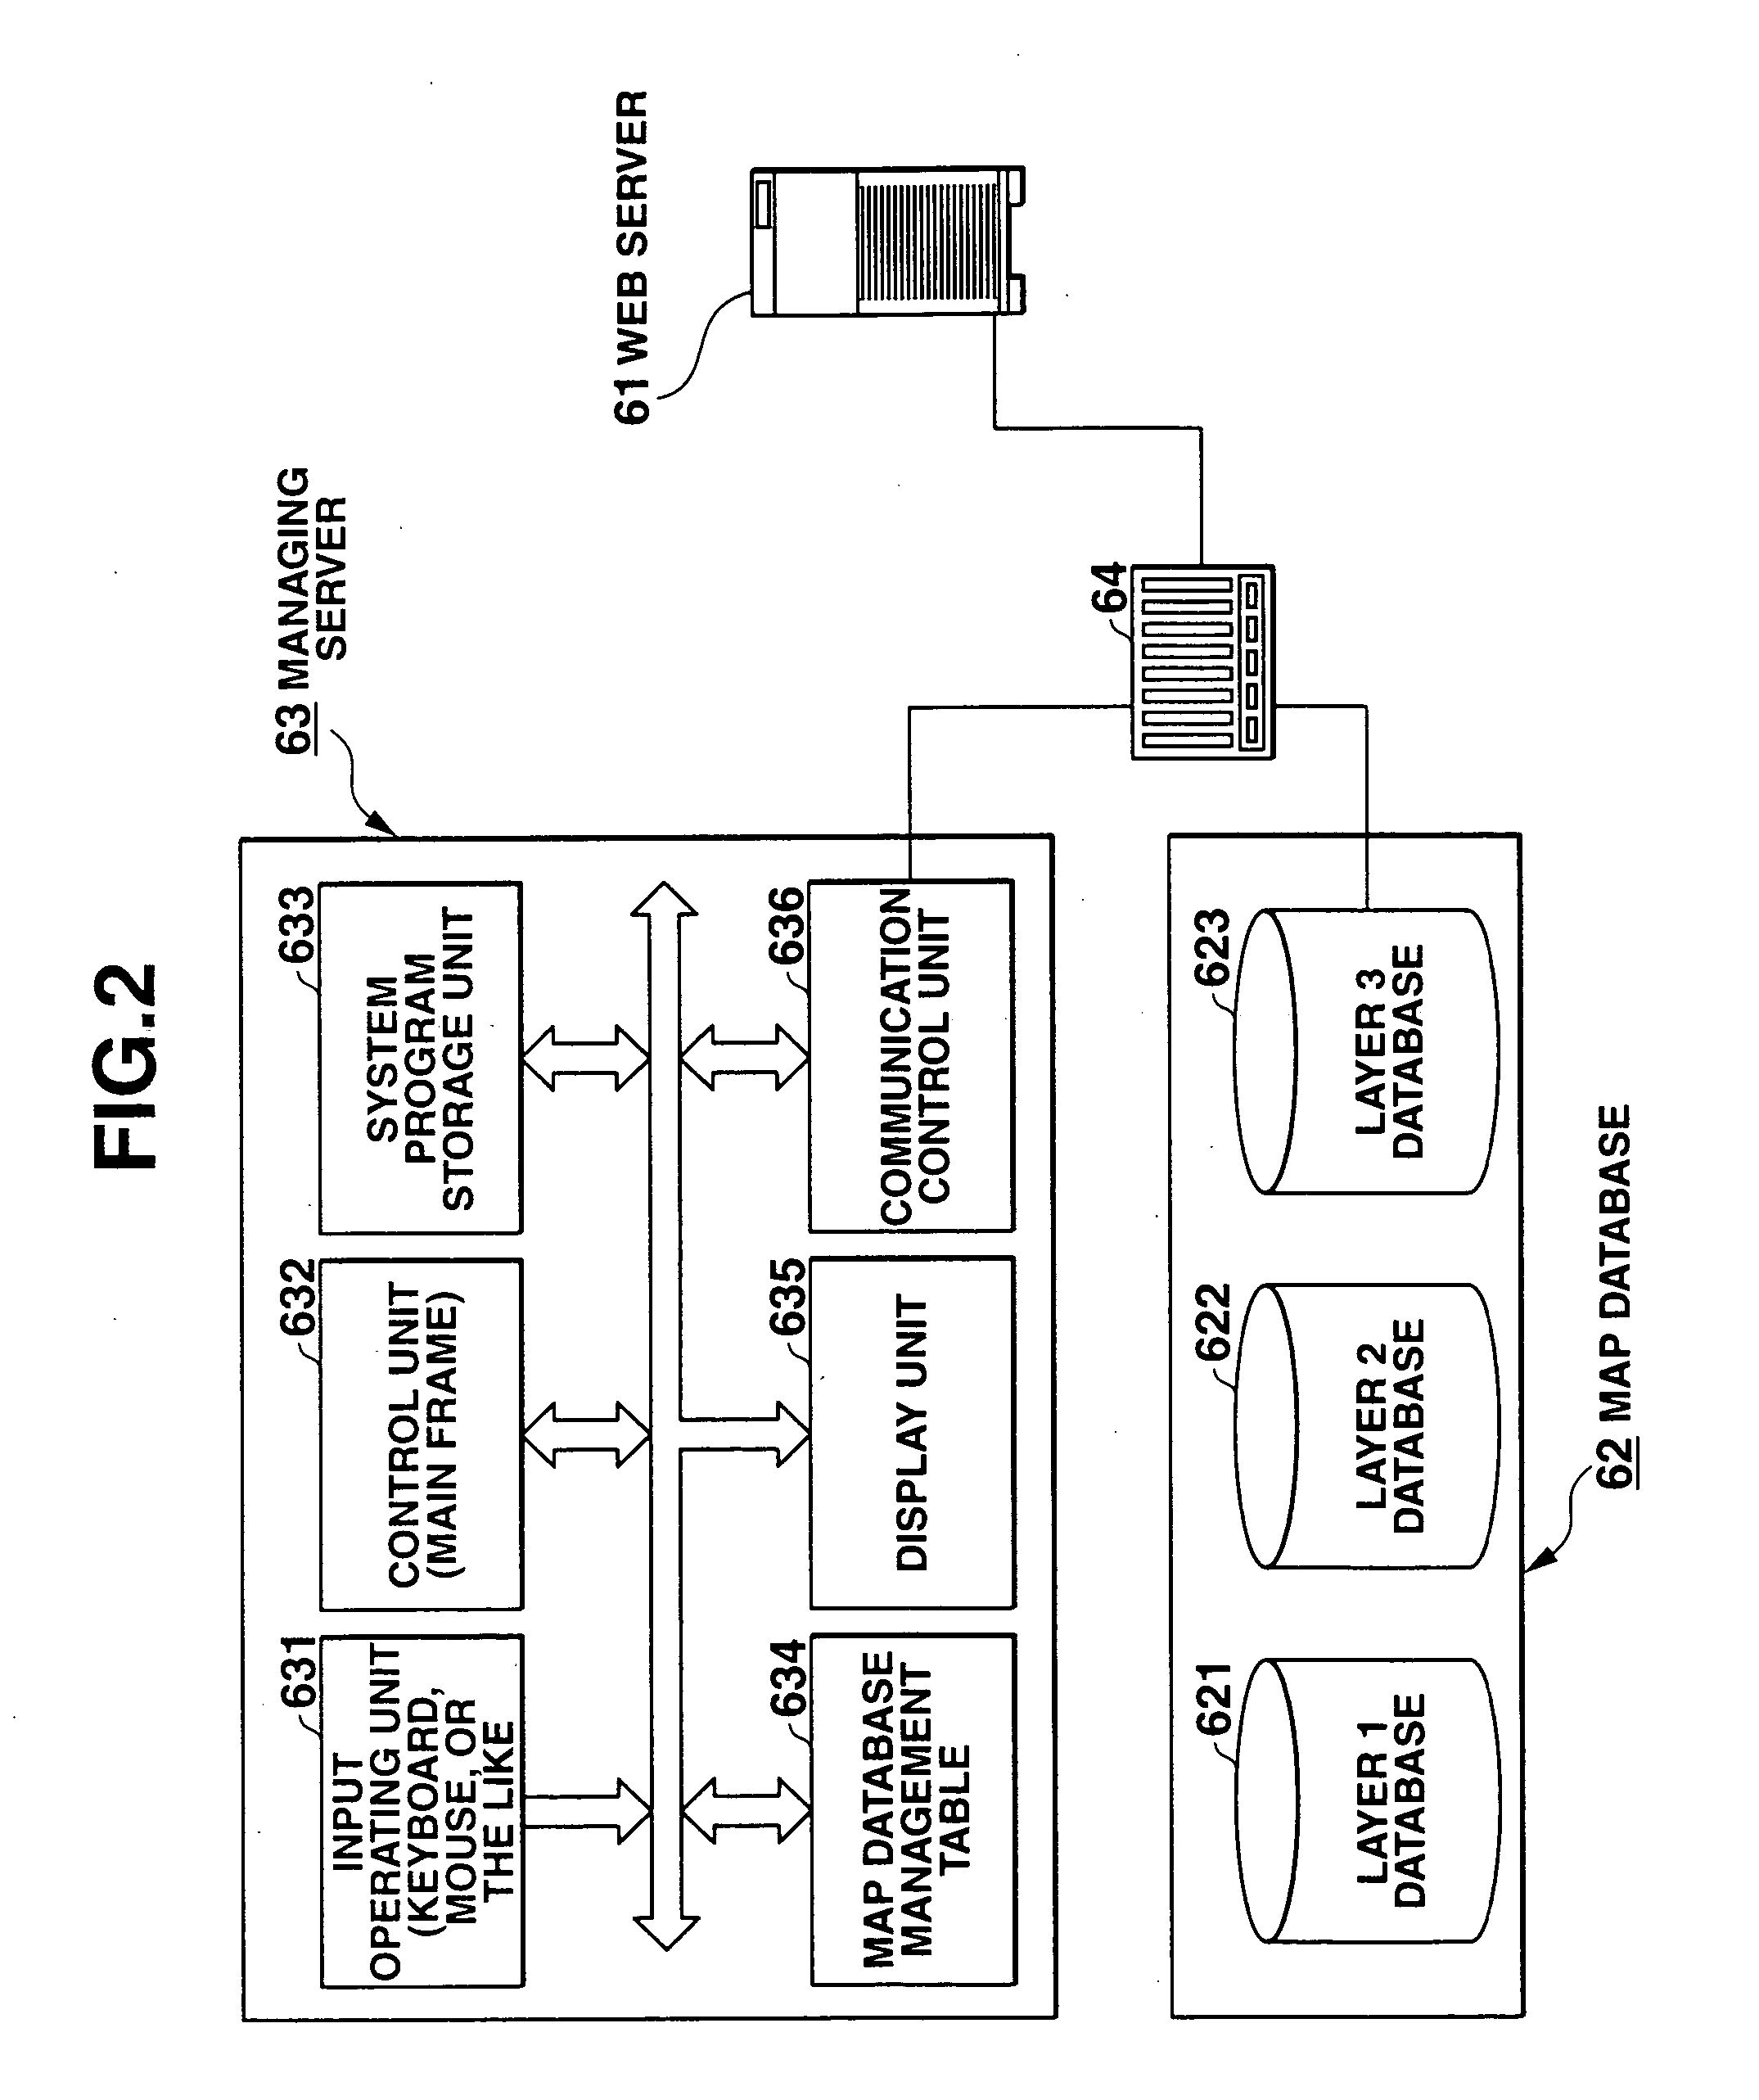 Electronic device, information display method, and information display program